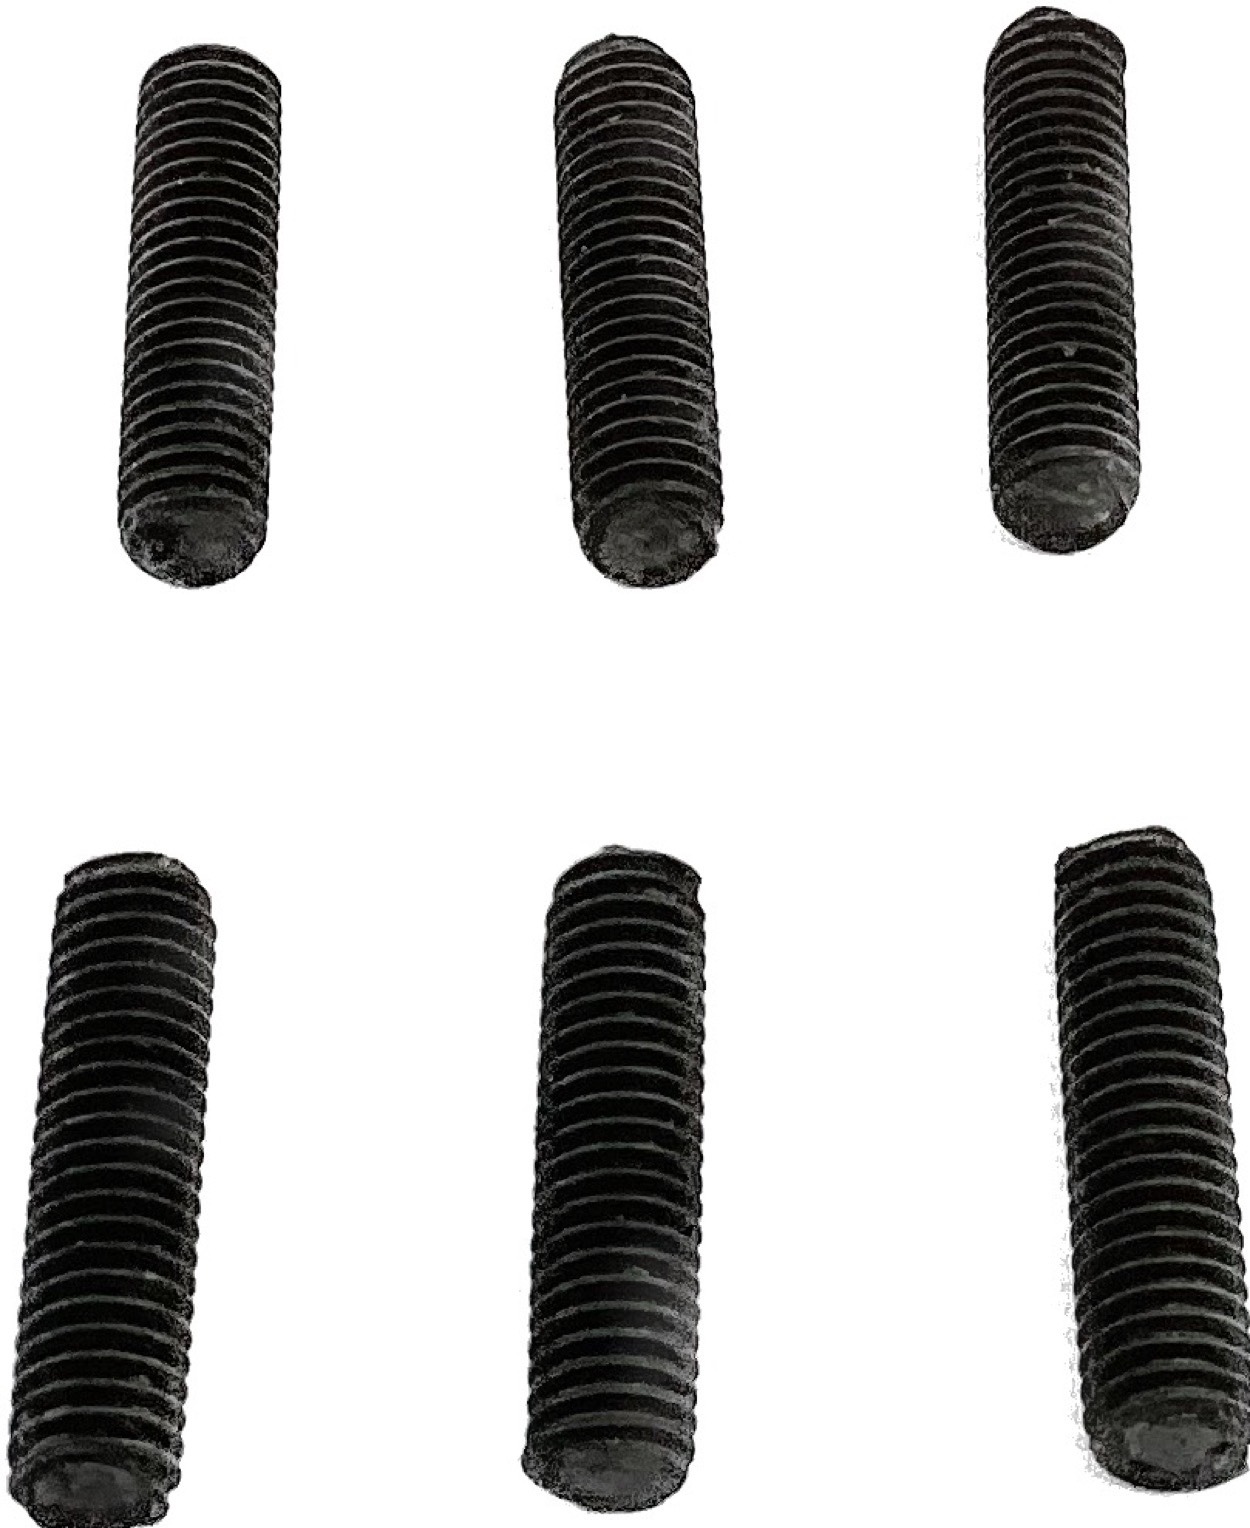 6mm Stud For Oil Drain Plate, Set Of 6